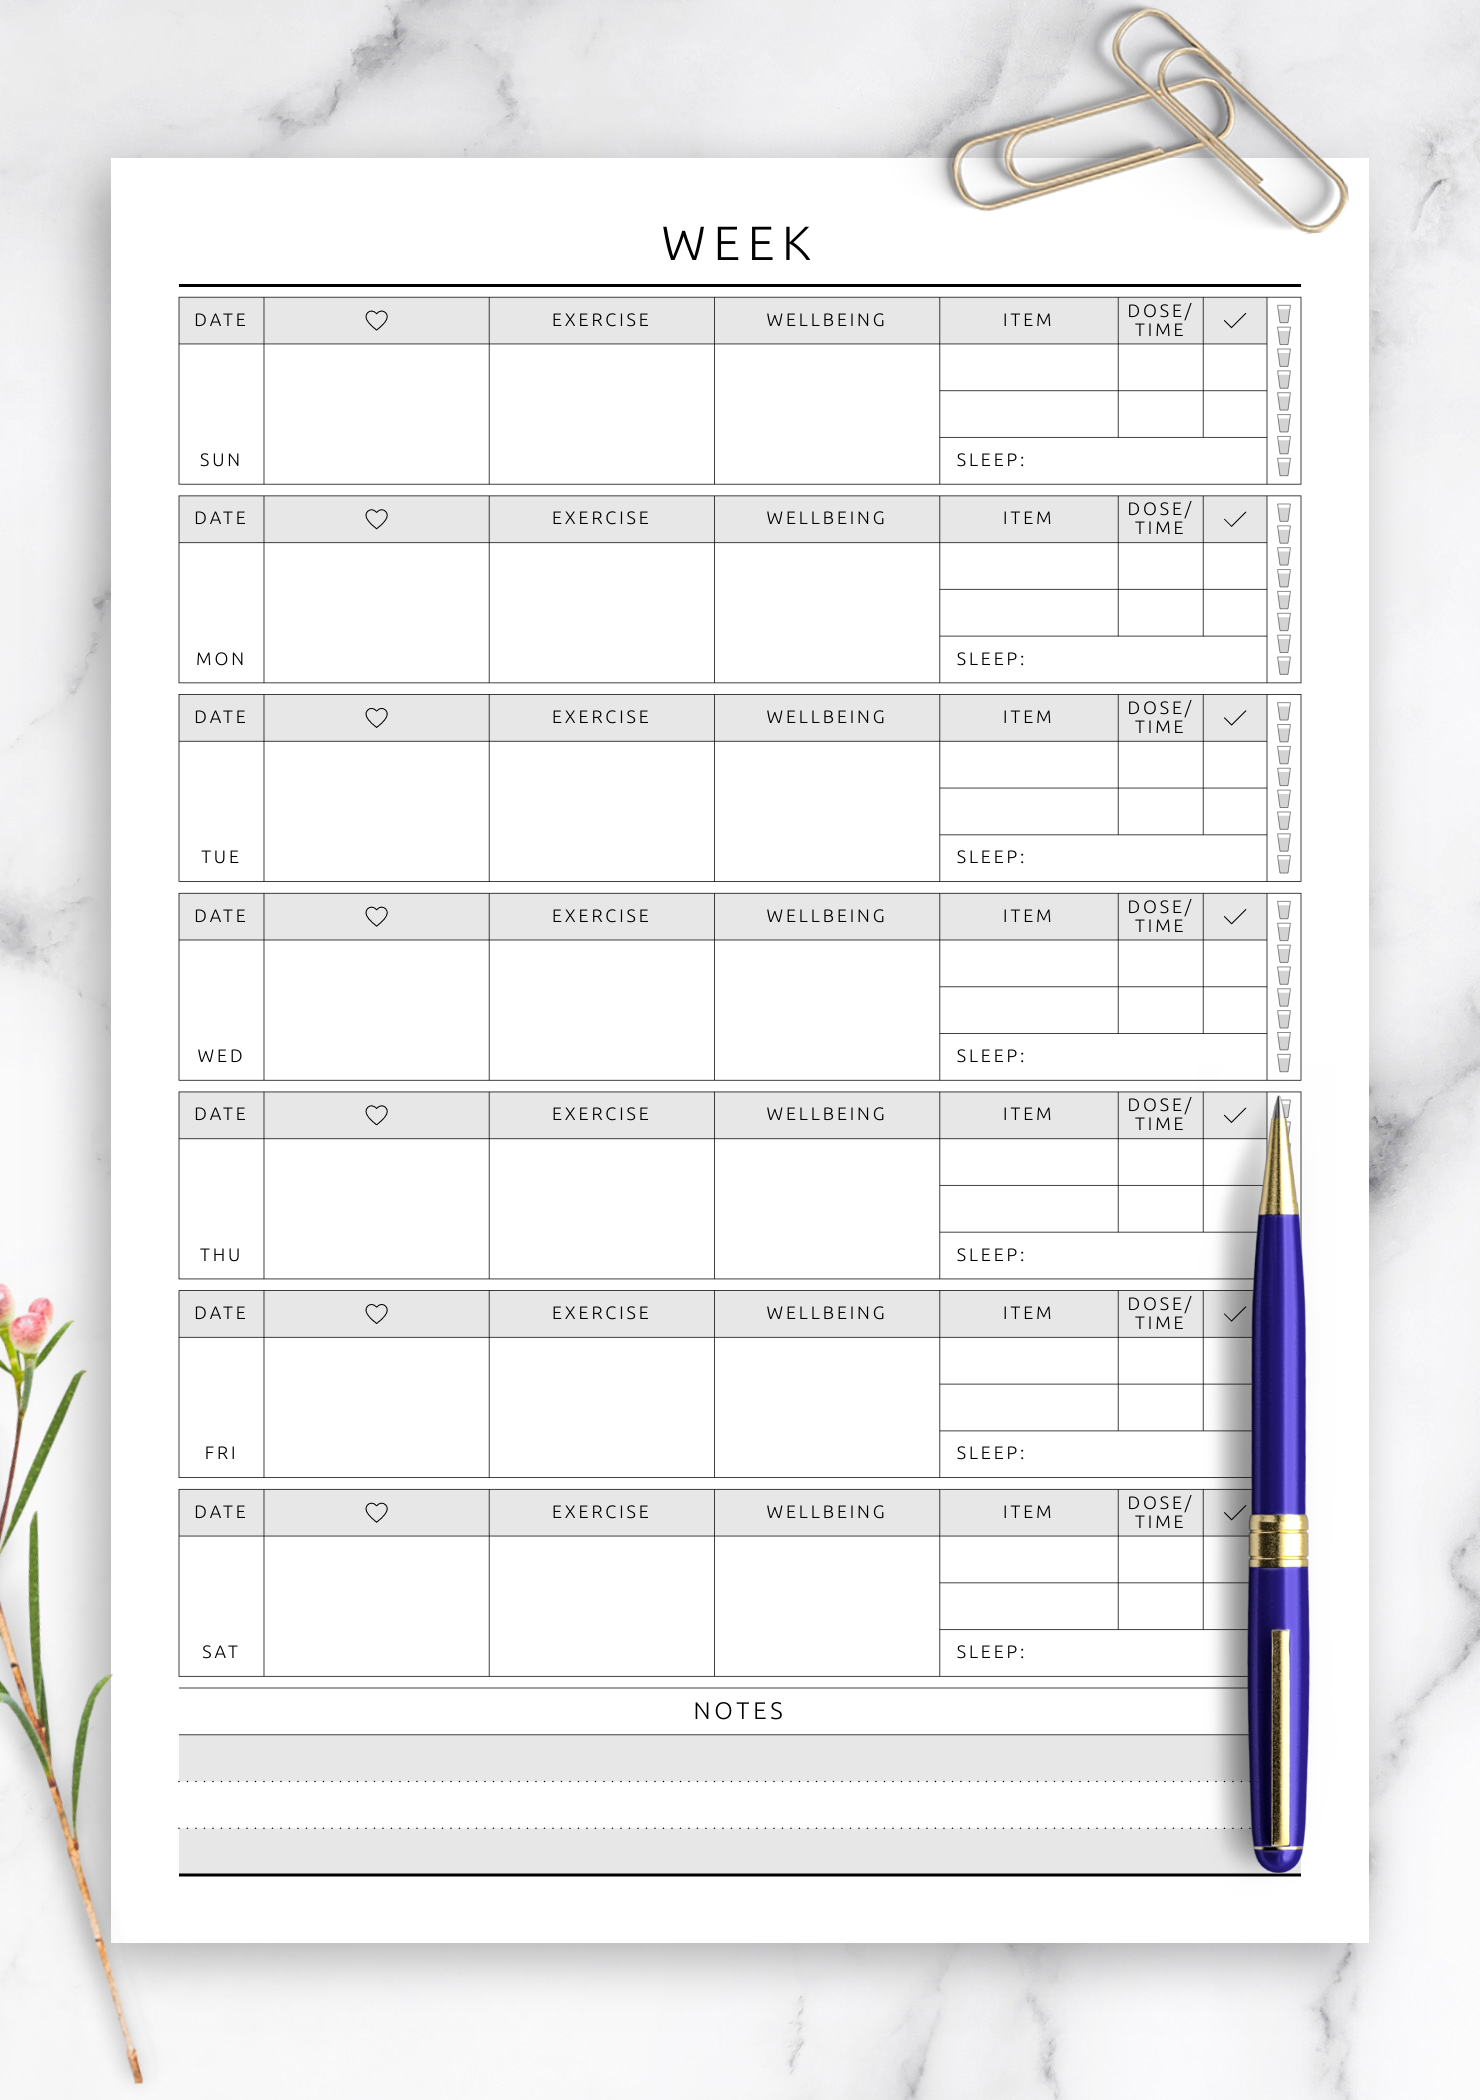 Download Printable Weekly Fitness Planner Template PDF